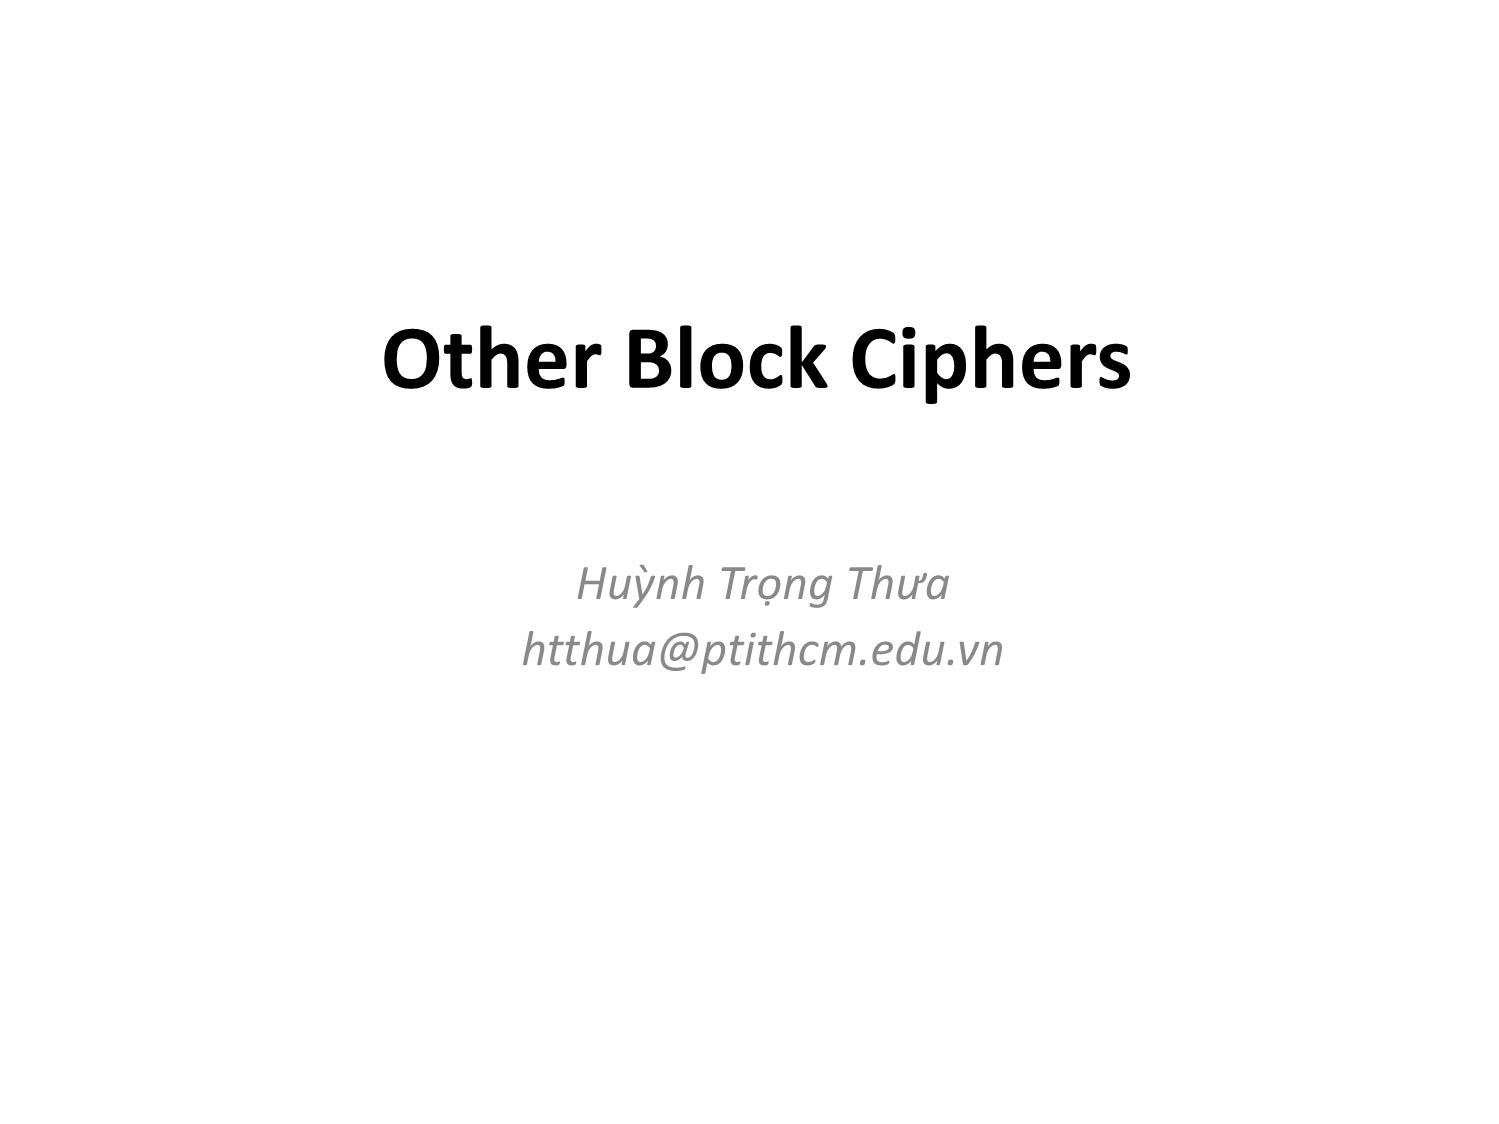 Other block ciphers trang 1